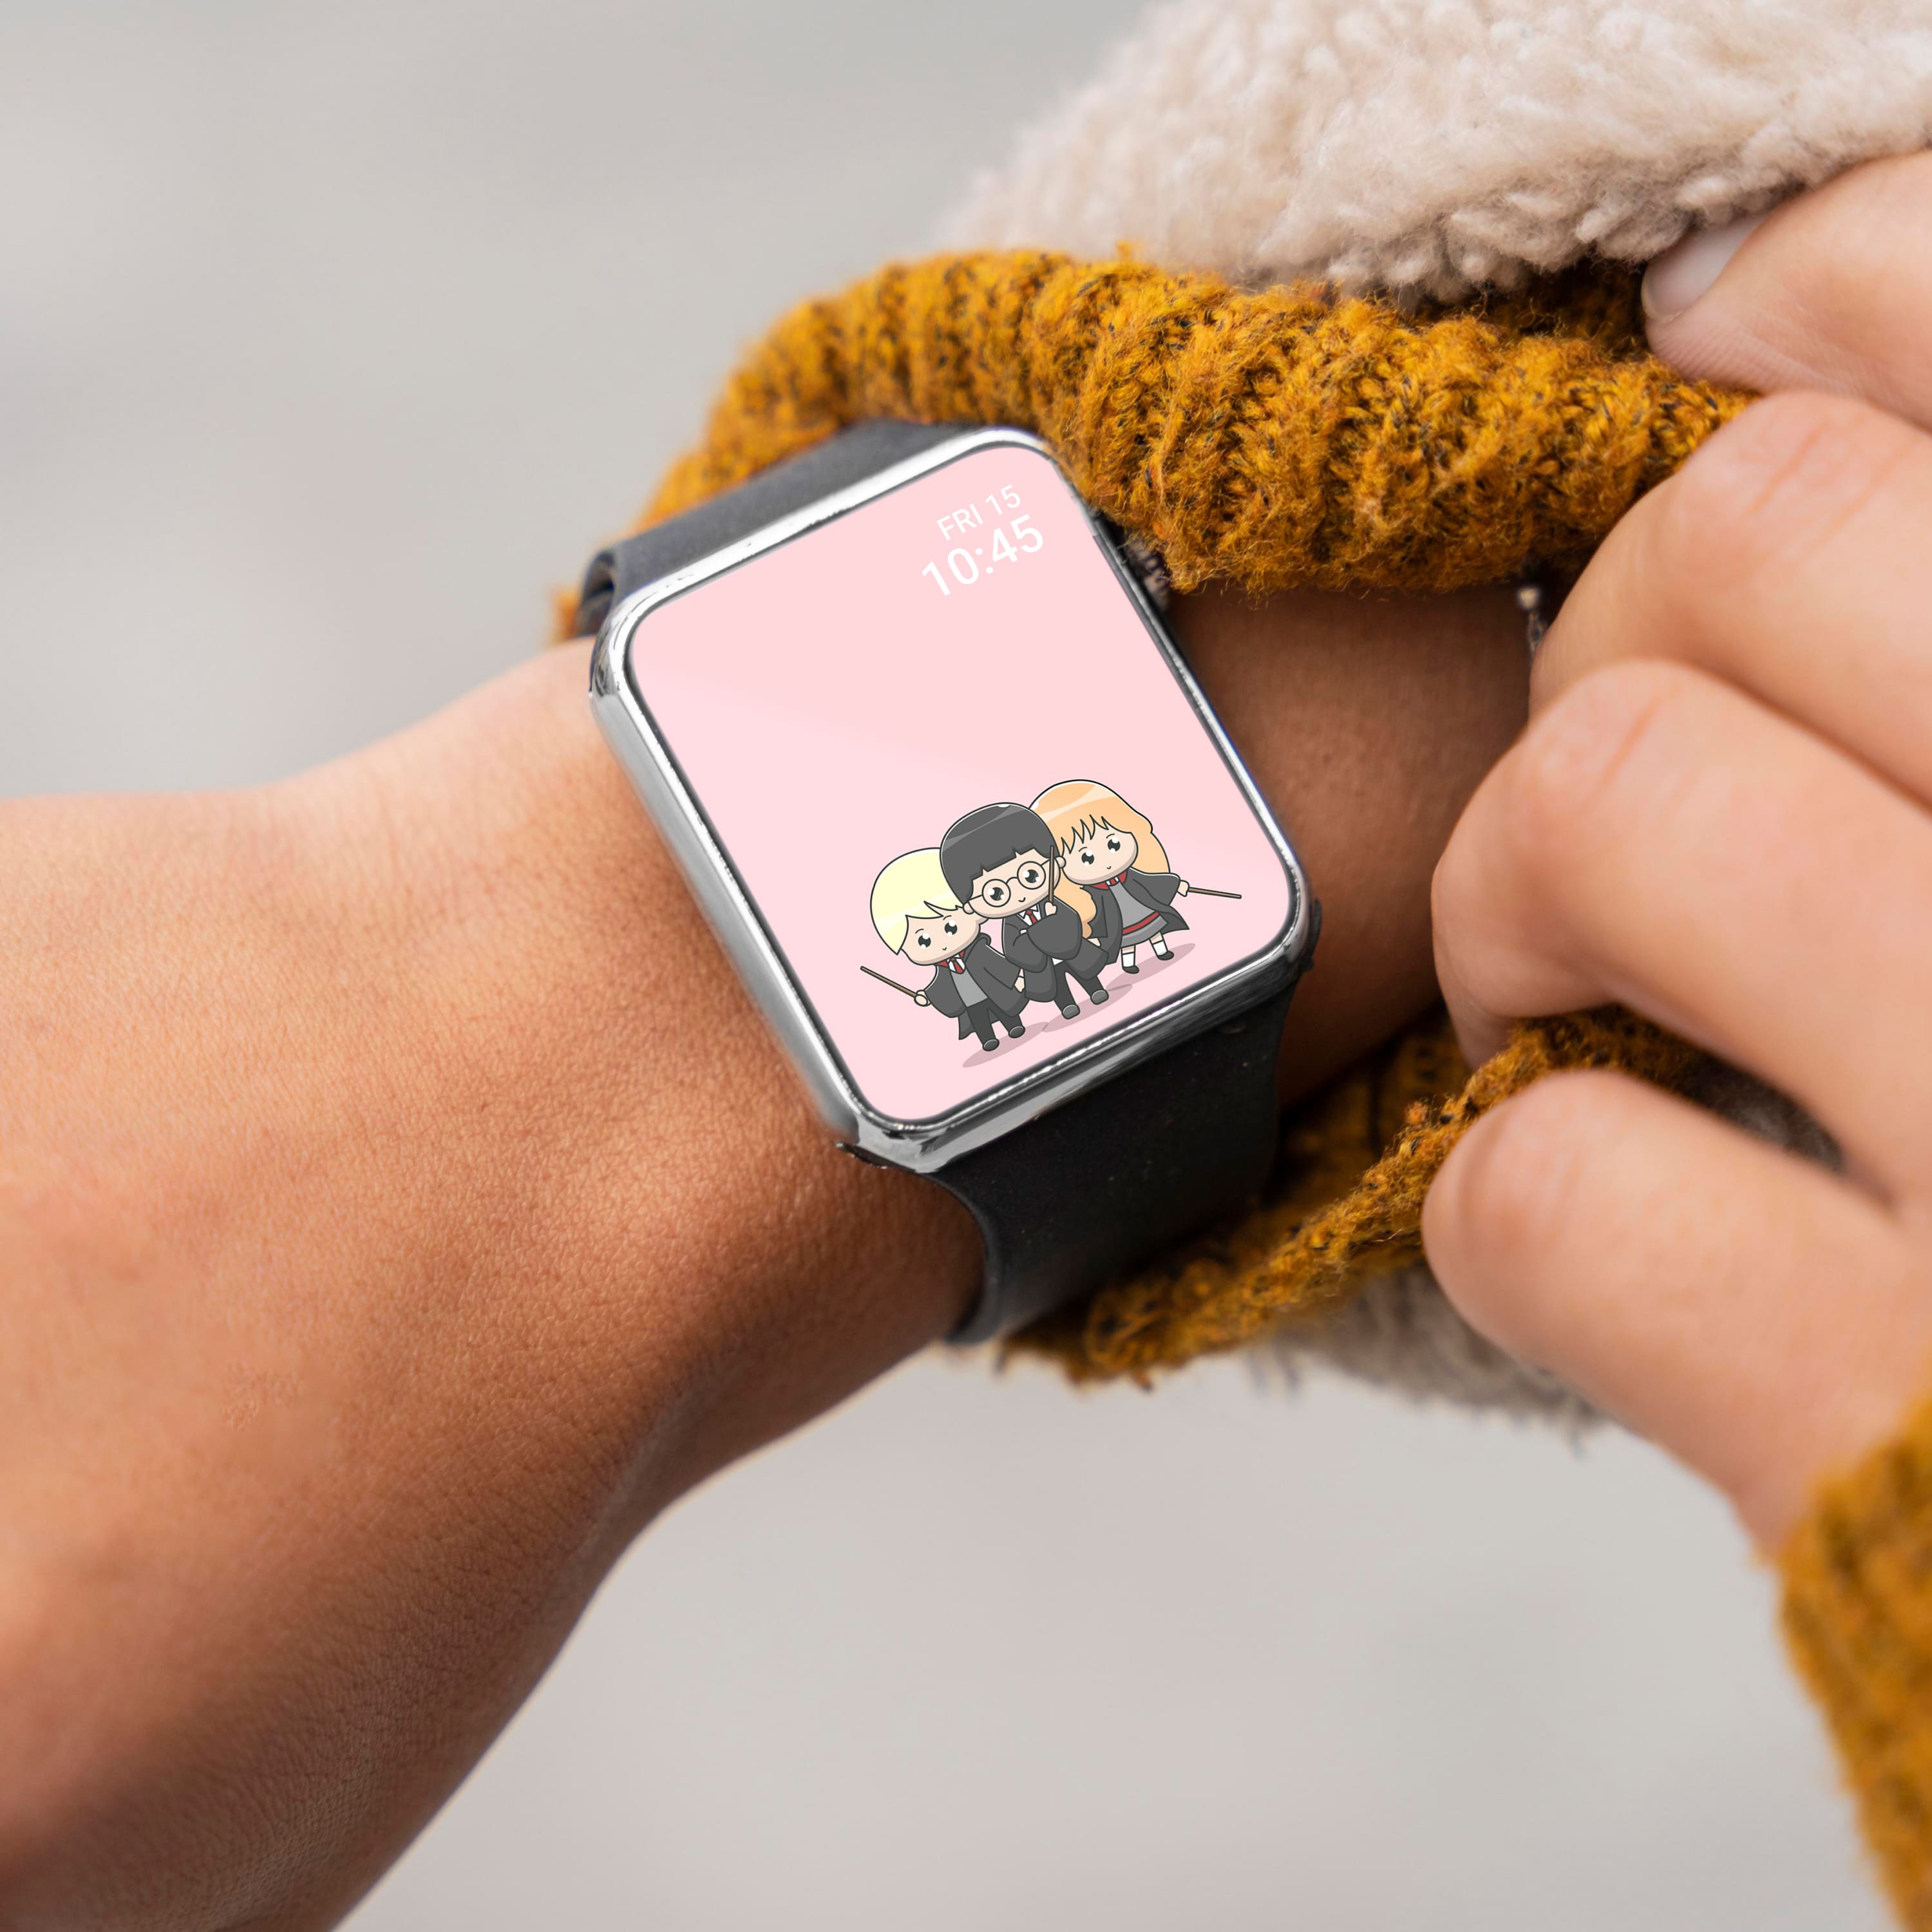 Classic pink harry potter apple watch faces.